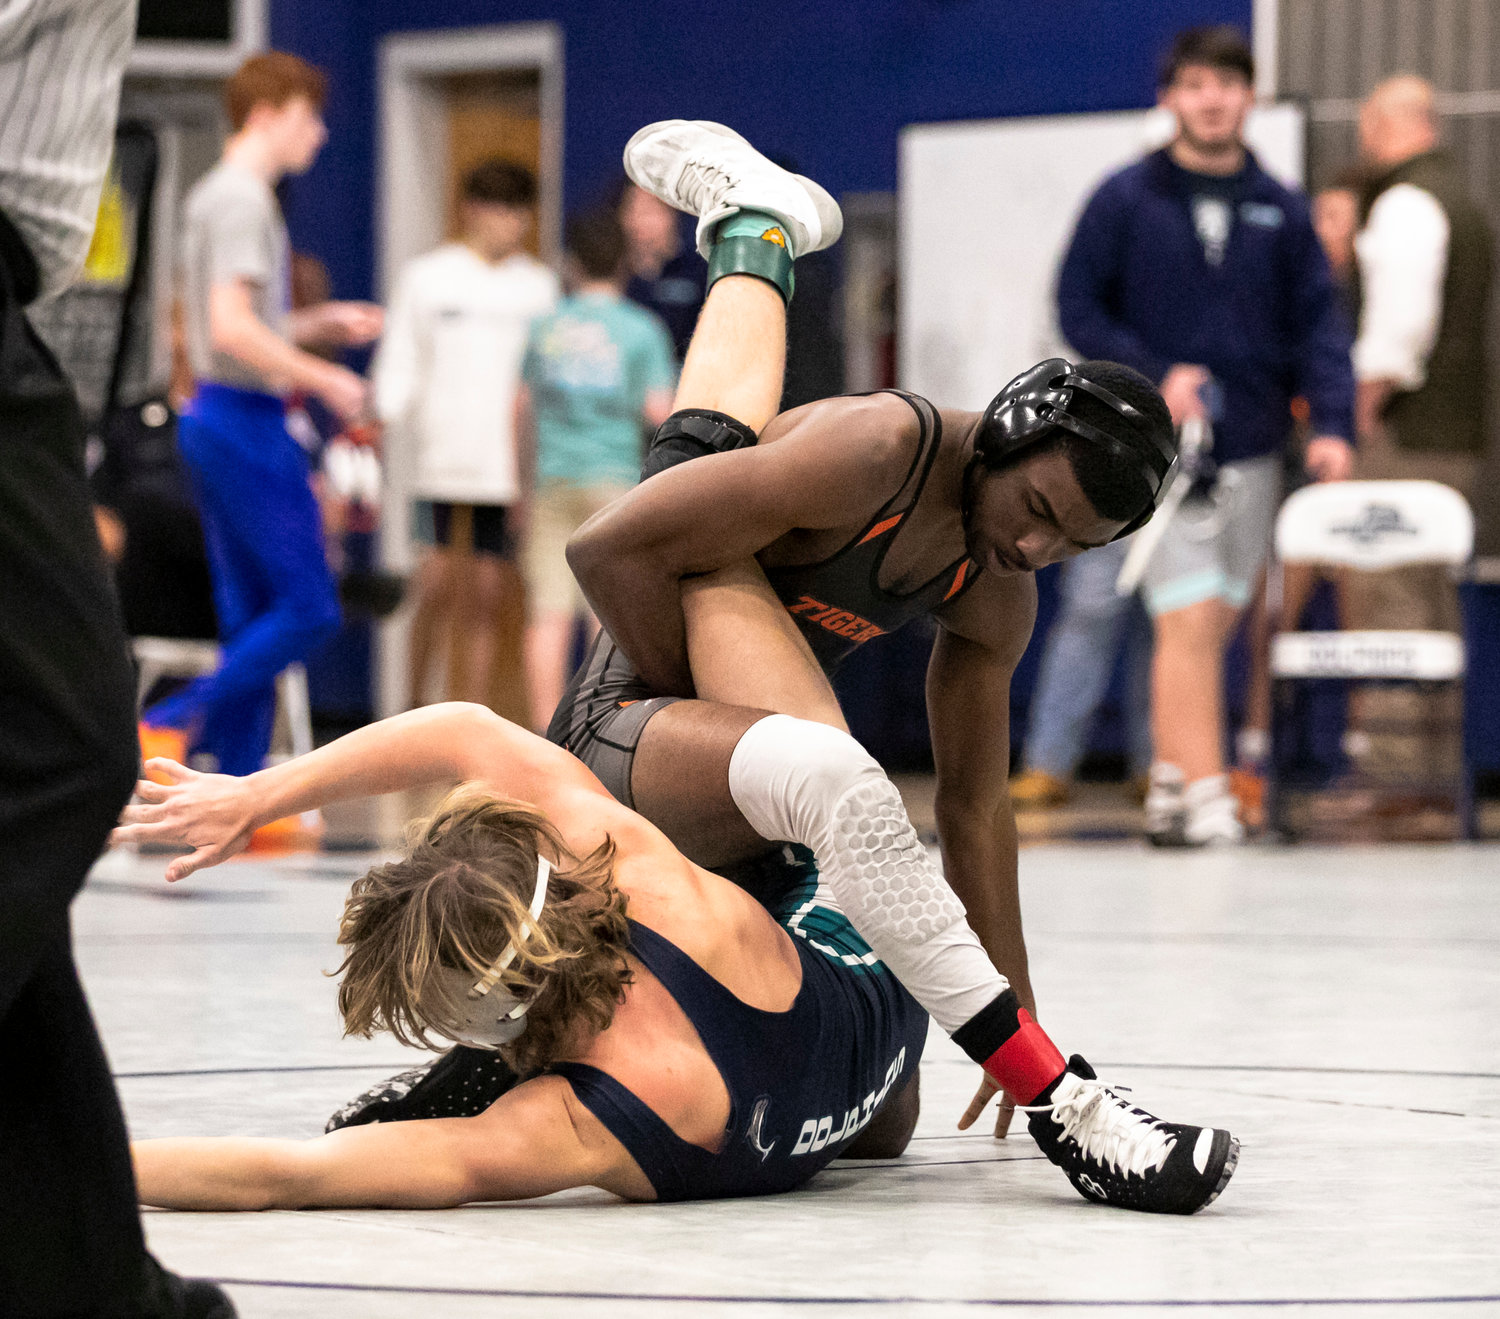 Baldwin County’s Joaquin Crook scores points in the opening round of the 132-pound class during the Baldwin County Championships at Gulf Shores High School Friday, Jan. 6. Crook recorded a third-place finish as one of the Tigers’ three all-county wrestlers.